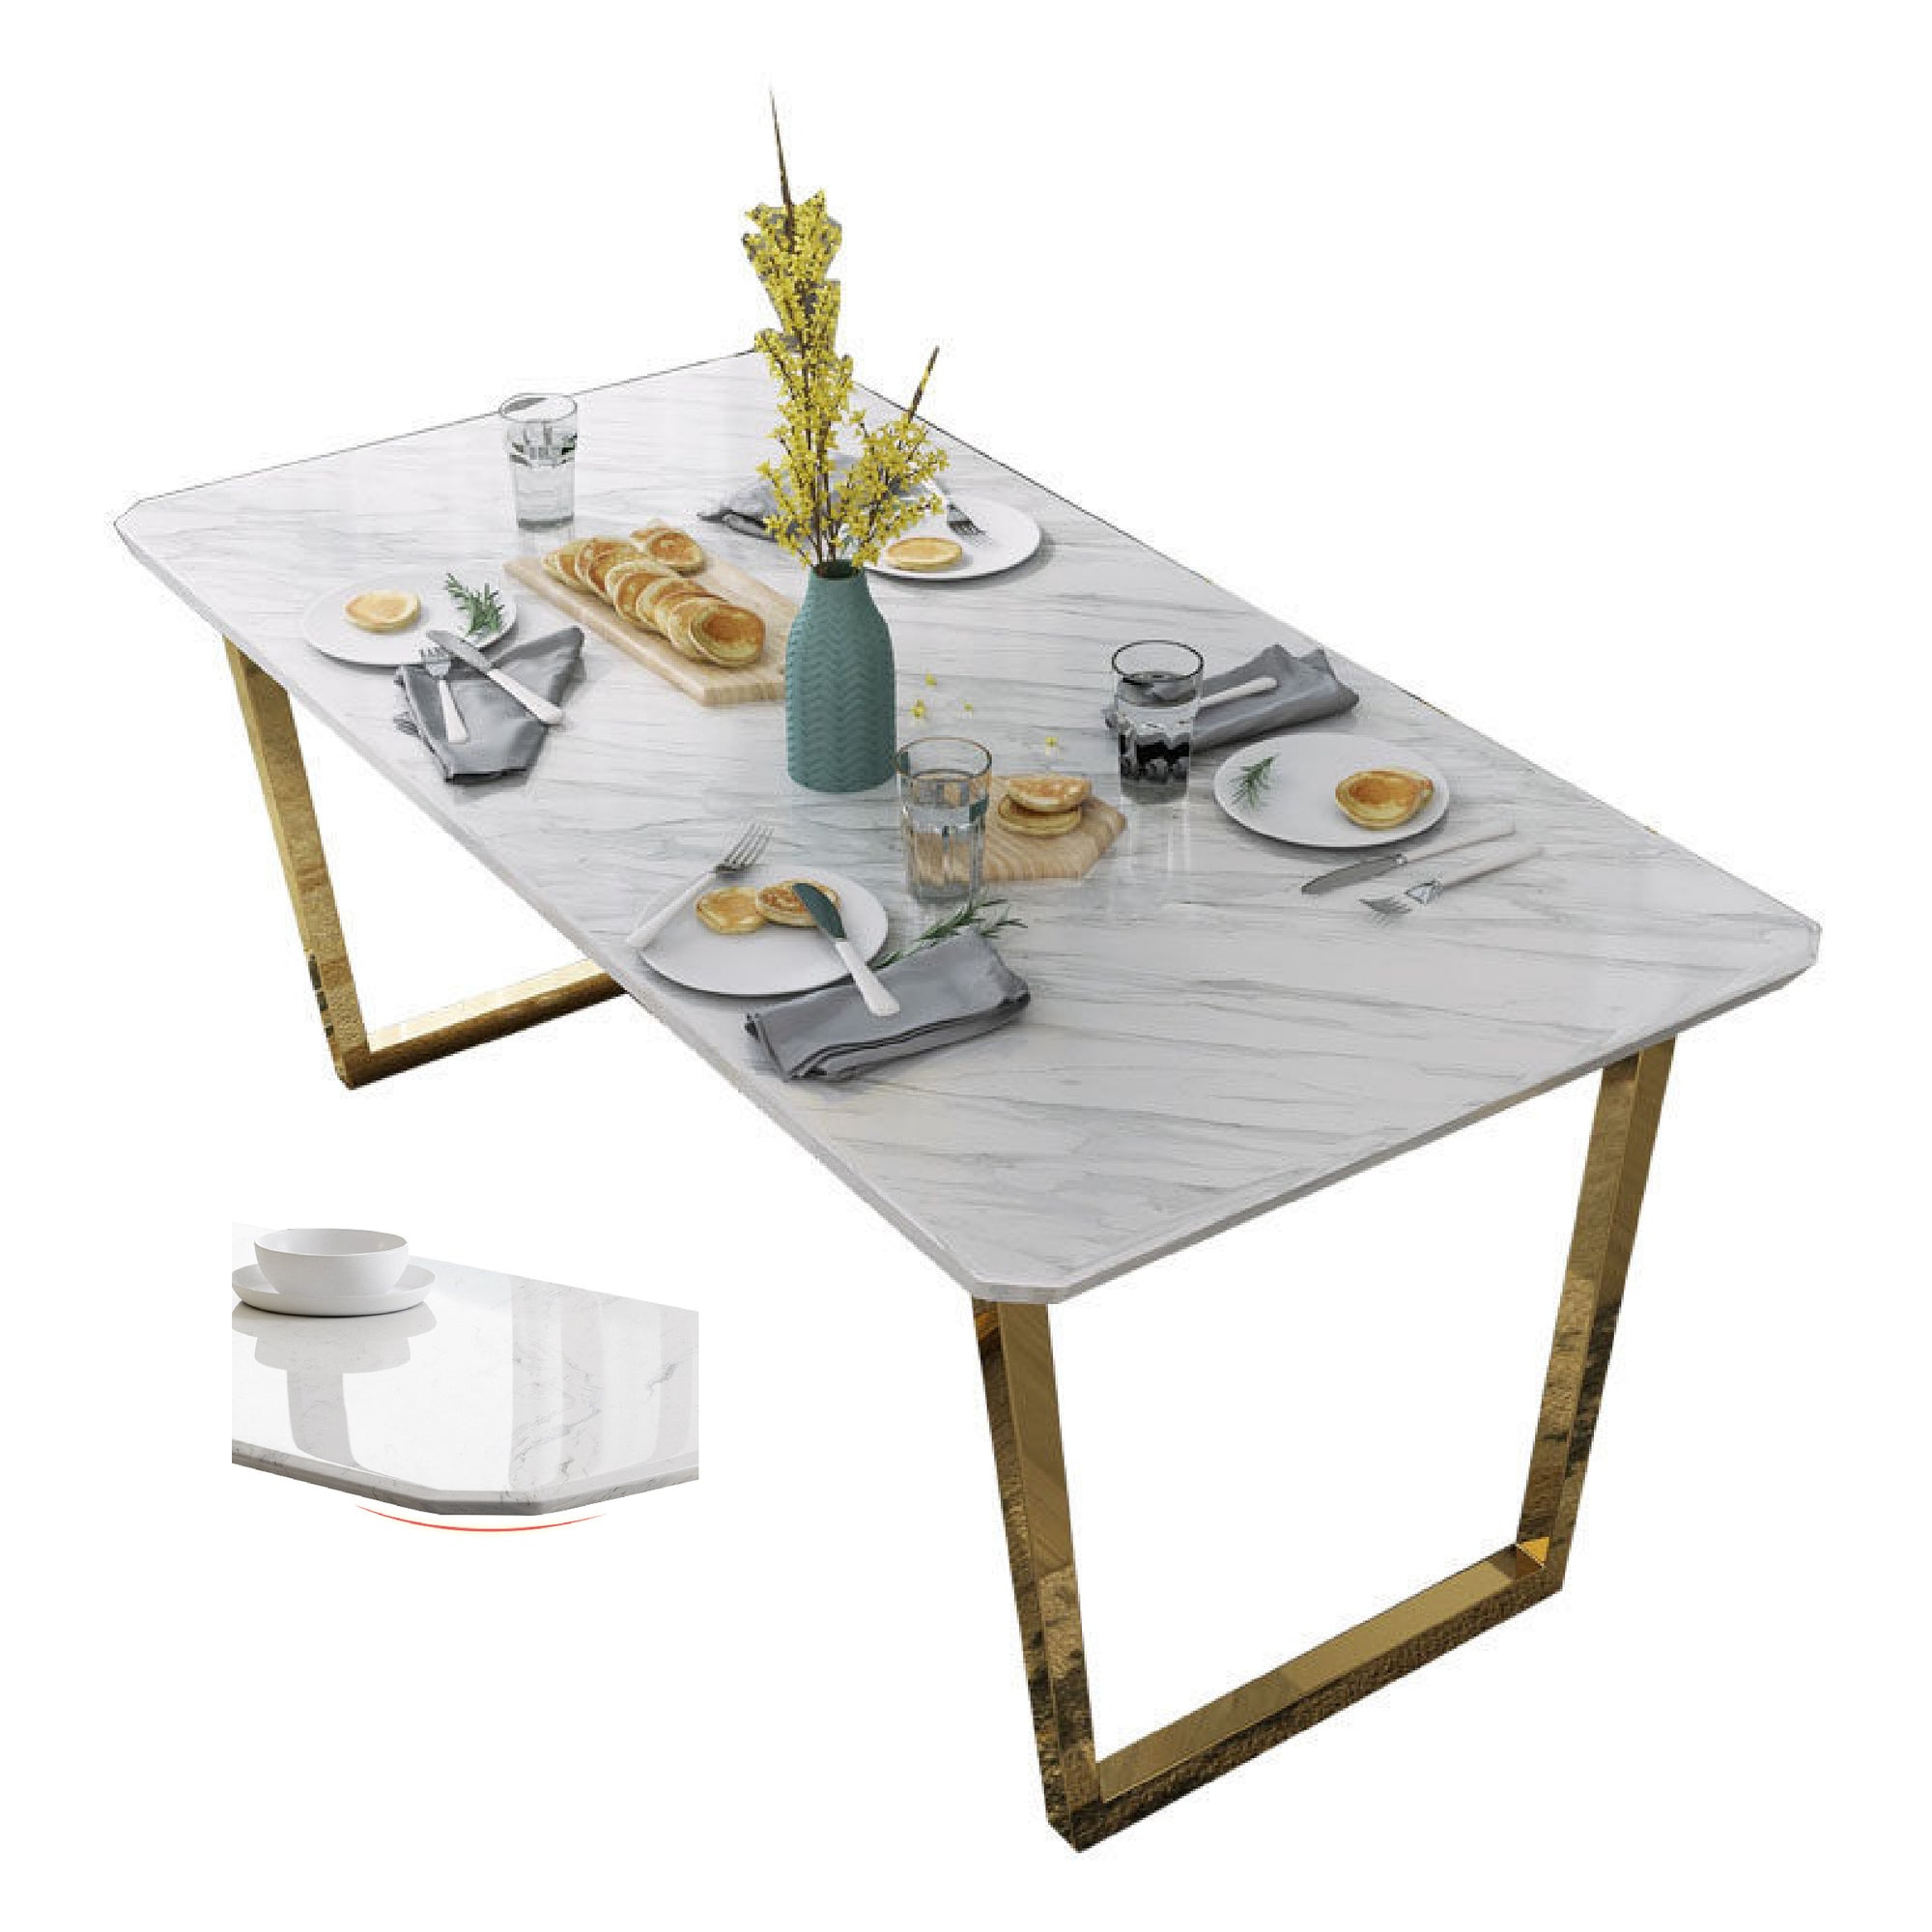 Jois Marble Table - mhomefurniture